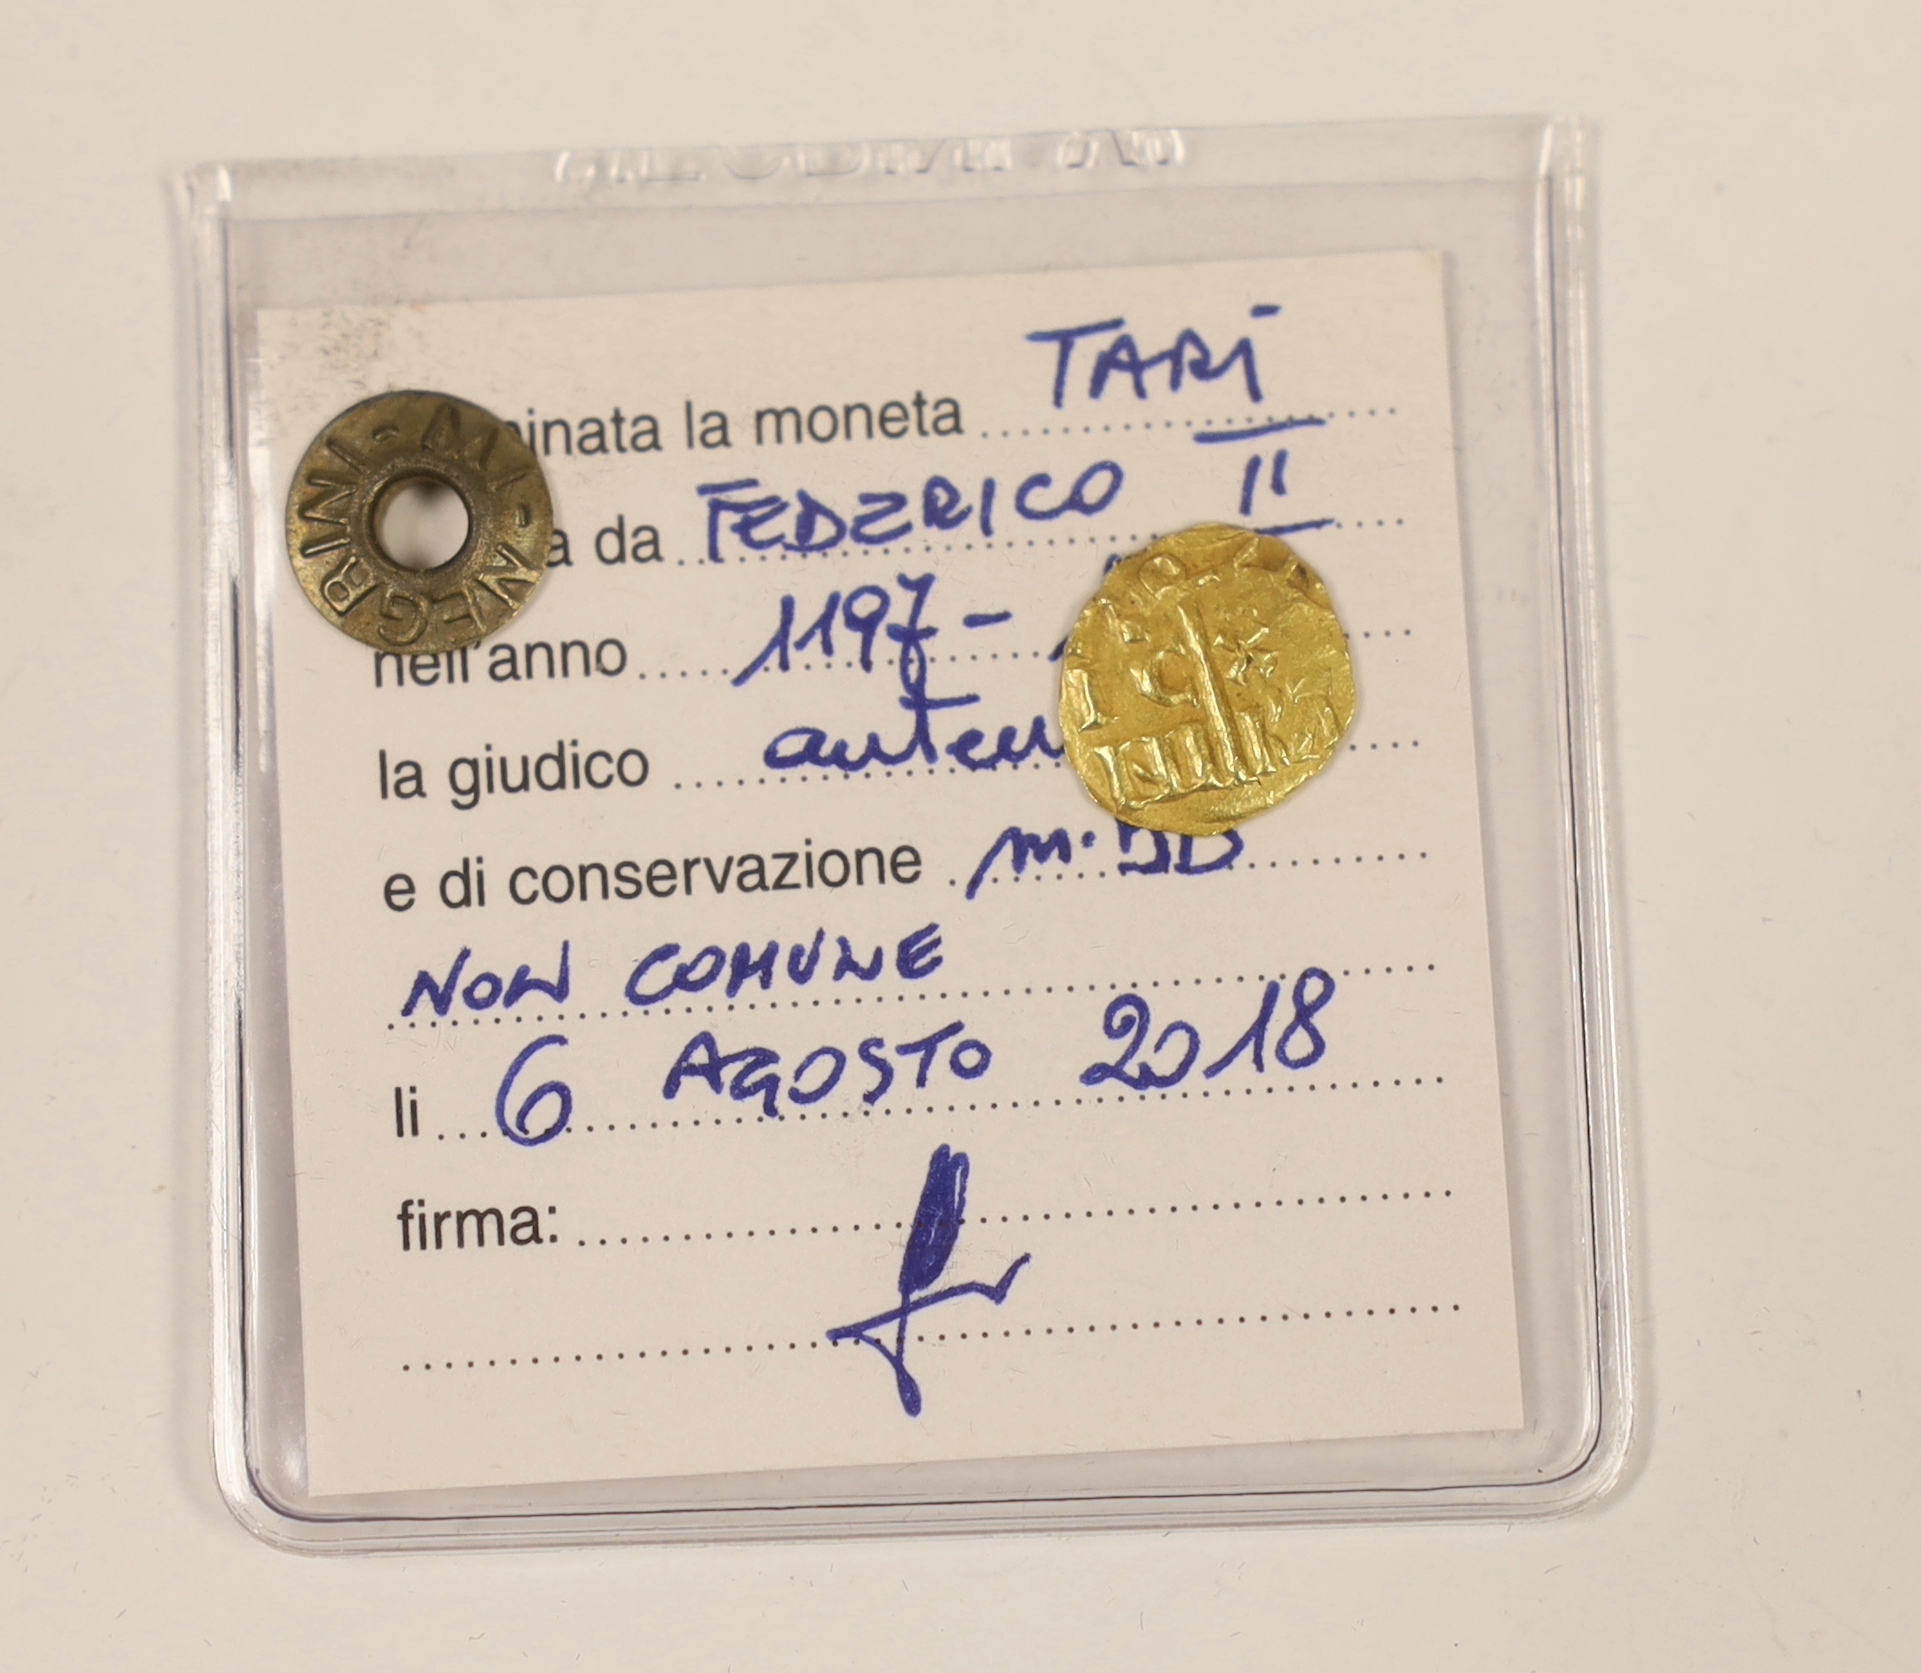 Italy coins, Kingdom of Sicily, Frederick II of Hohenstaufen (1197-1250), gold tari coin, 11mm, approx. 0.71g.